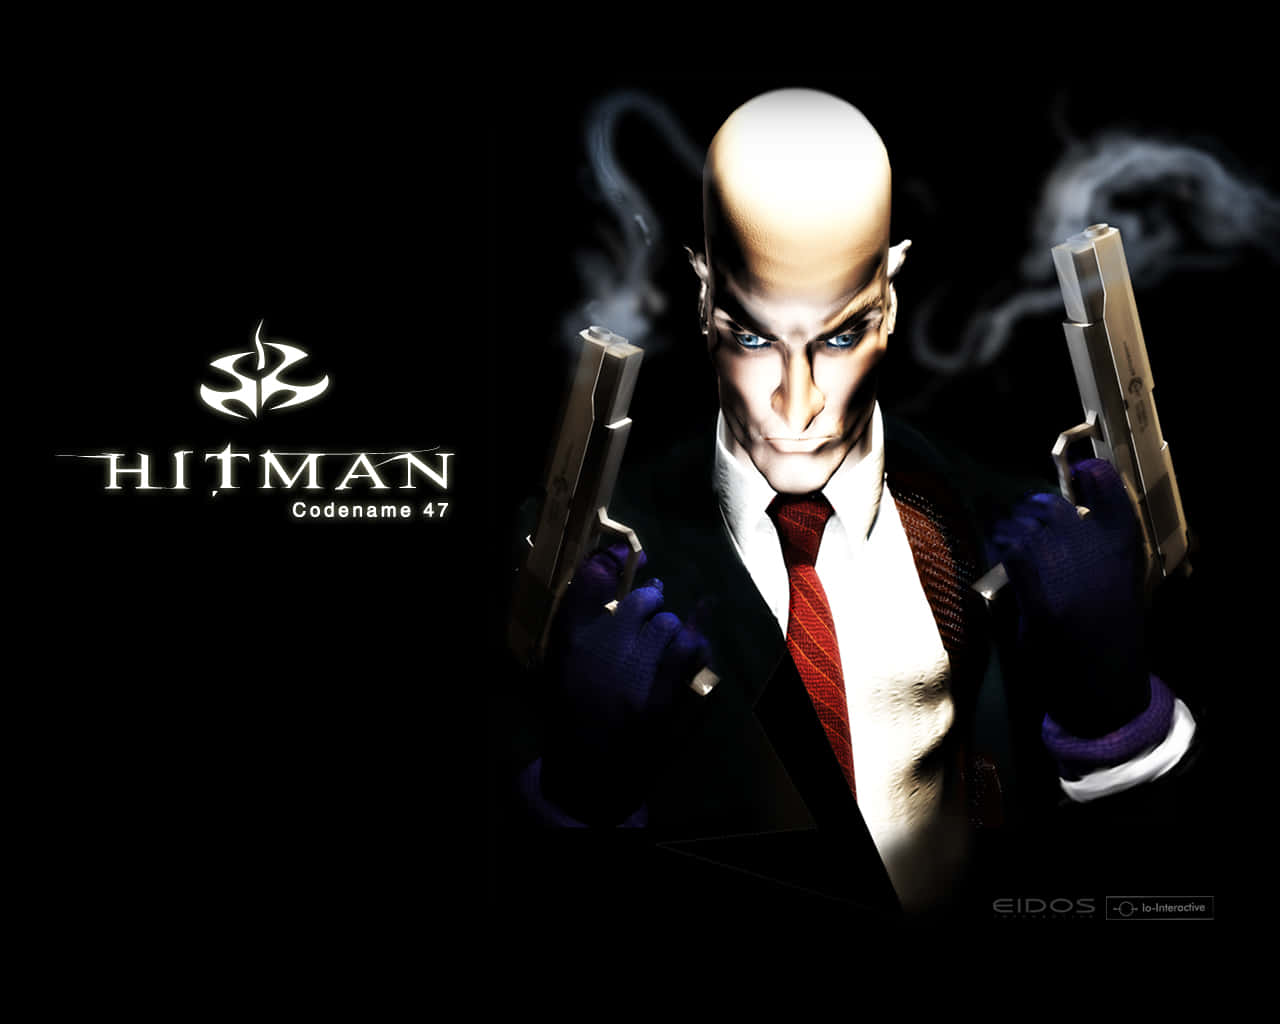 Hitman 2 — Reach Your Goal with Complete Precision